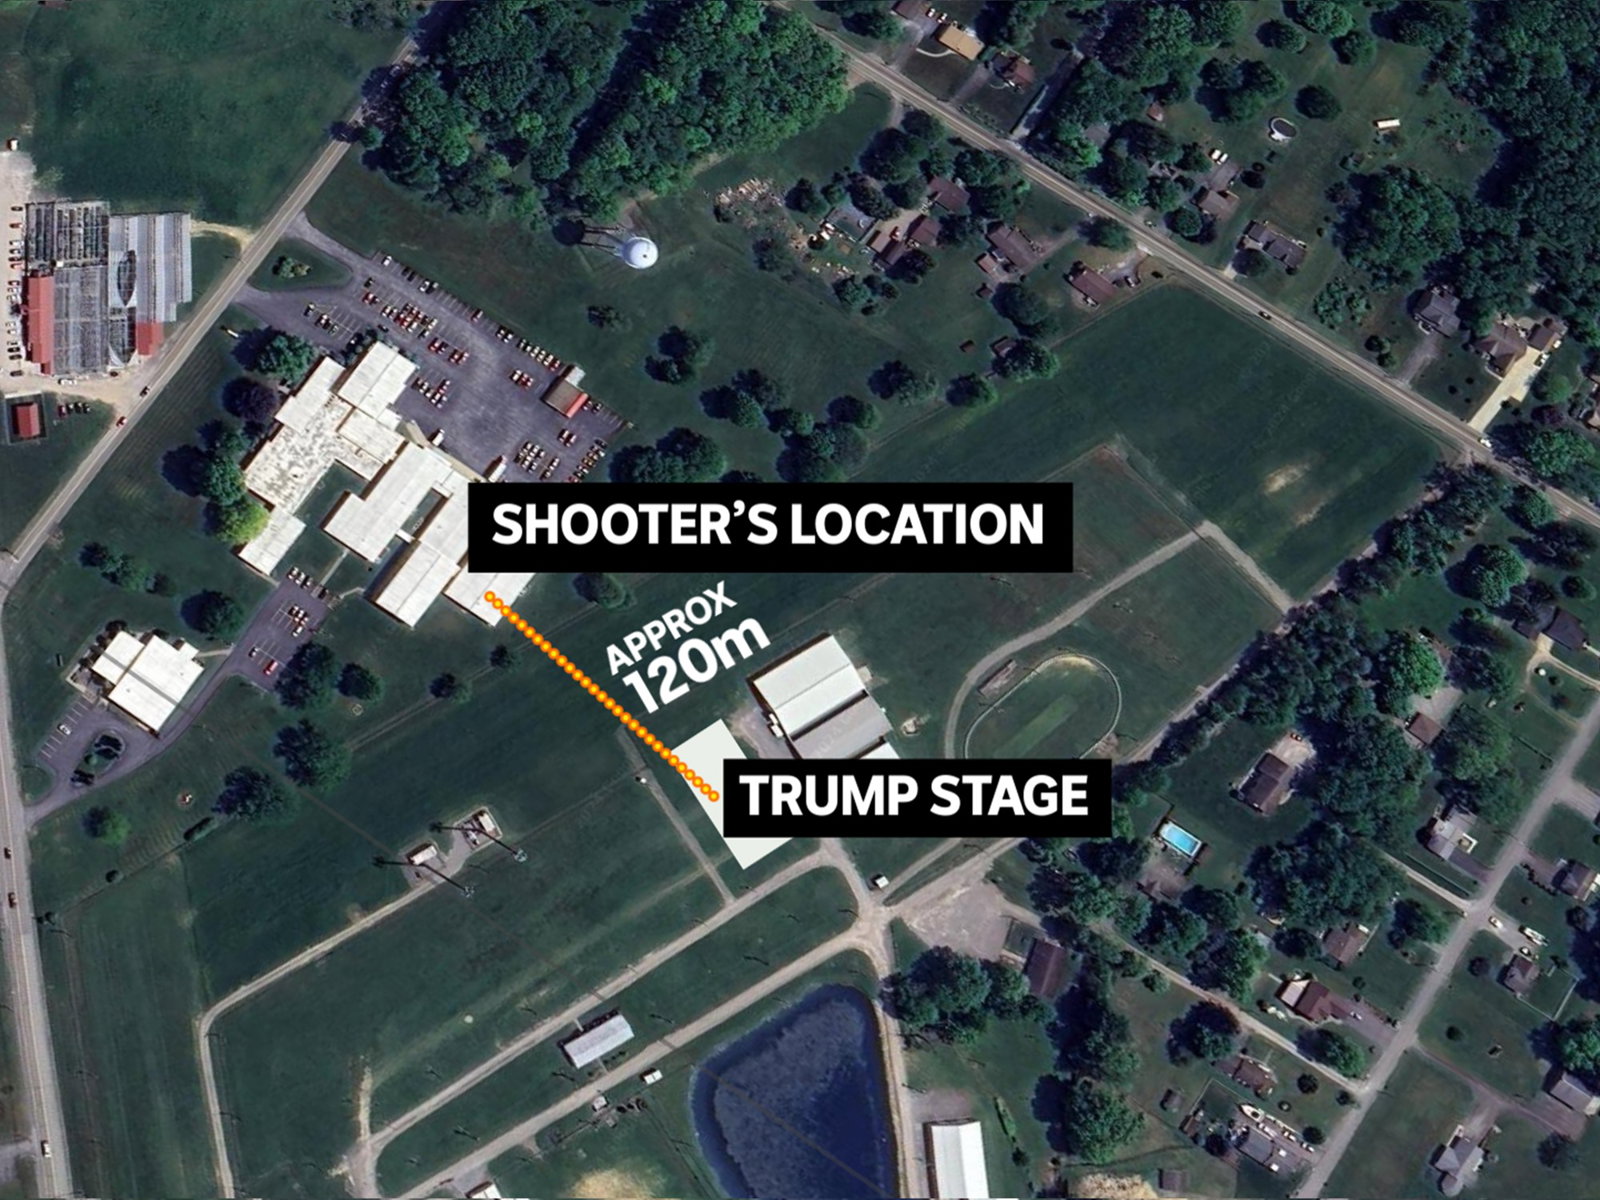 A map shows the location of the building from which the shooter fired, compared to the Trump rally stage.